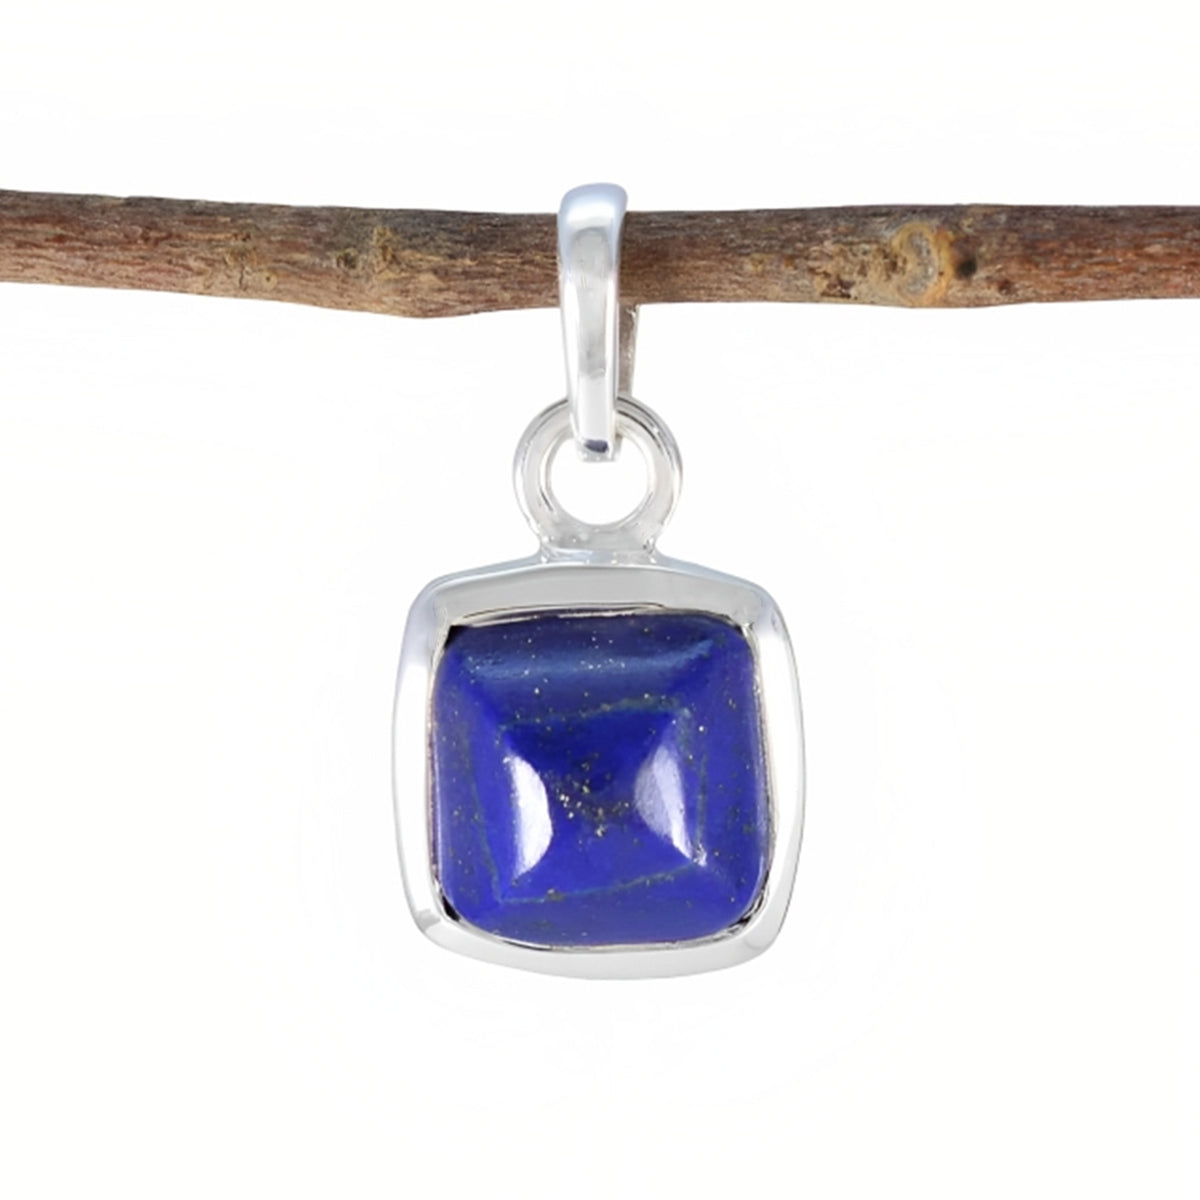 Riyo Real Gemstone Square Faceted Nevy Blue Lapis Lazuli Sterling Silver Pendant Gift For Friend